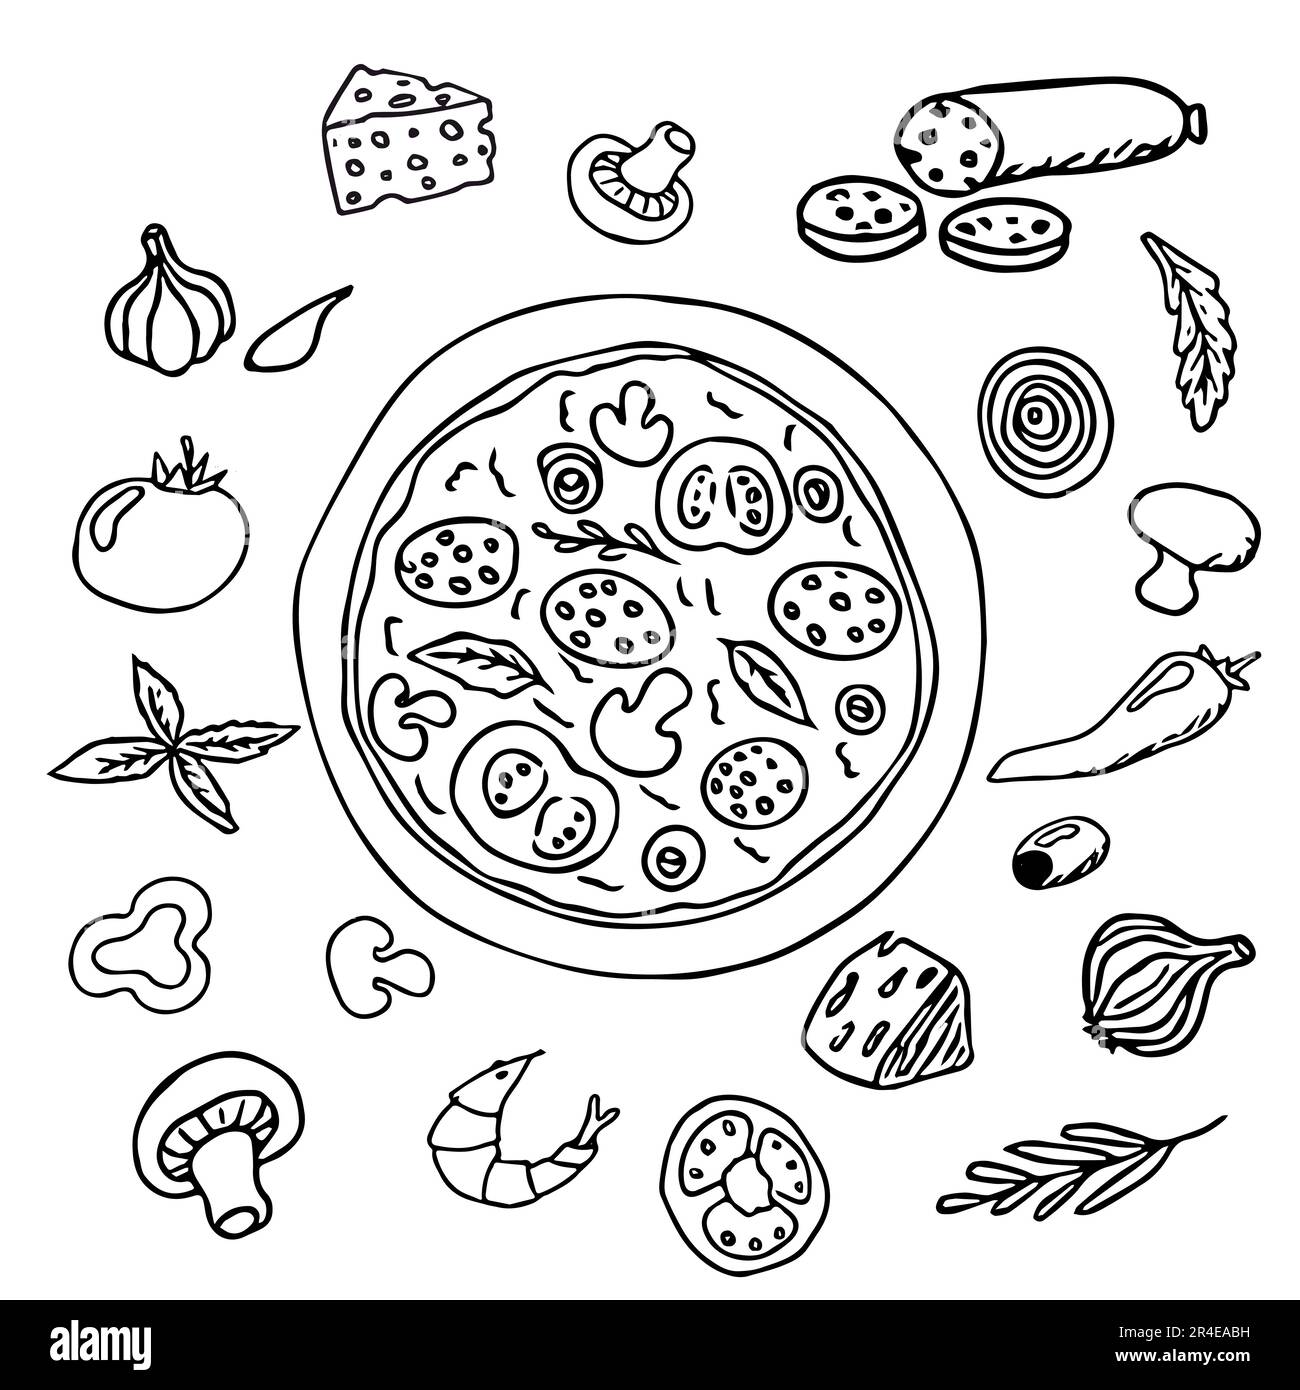 Friday Night and pizza!! <3  Doodle art, Sketch book, Doodles